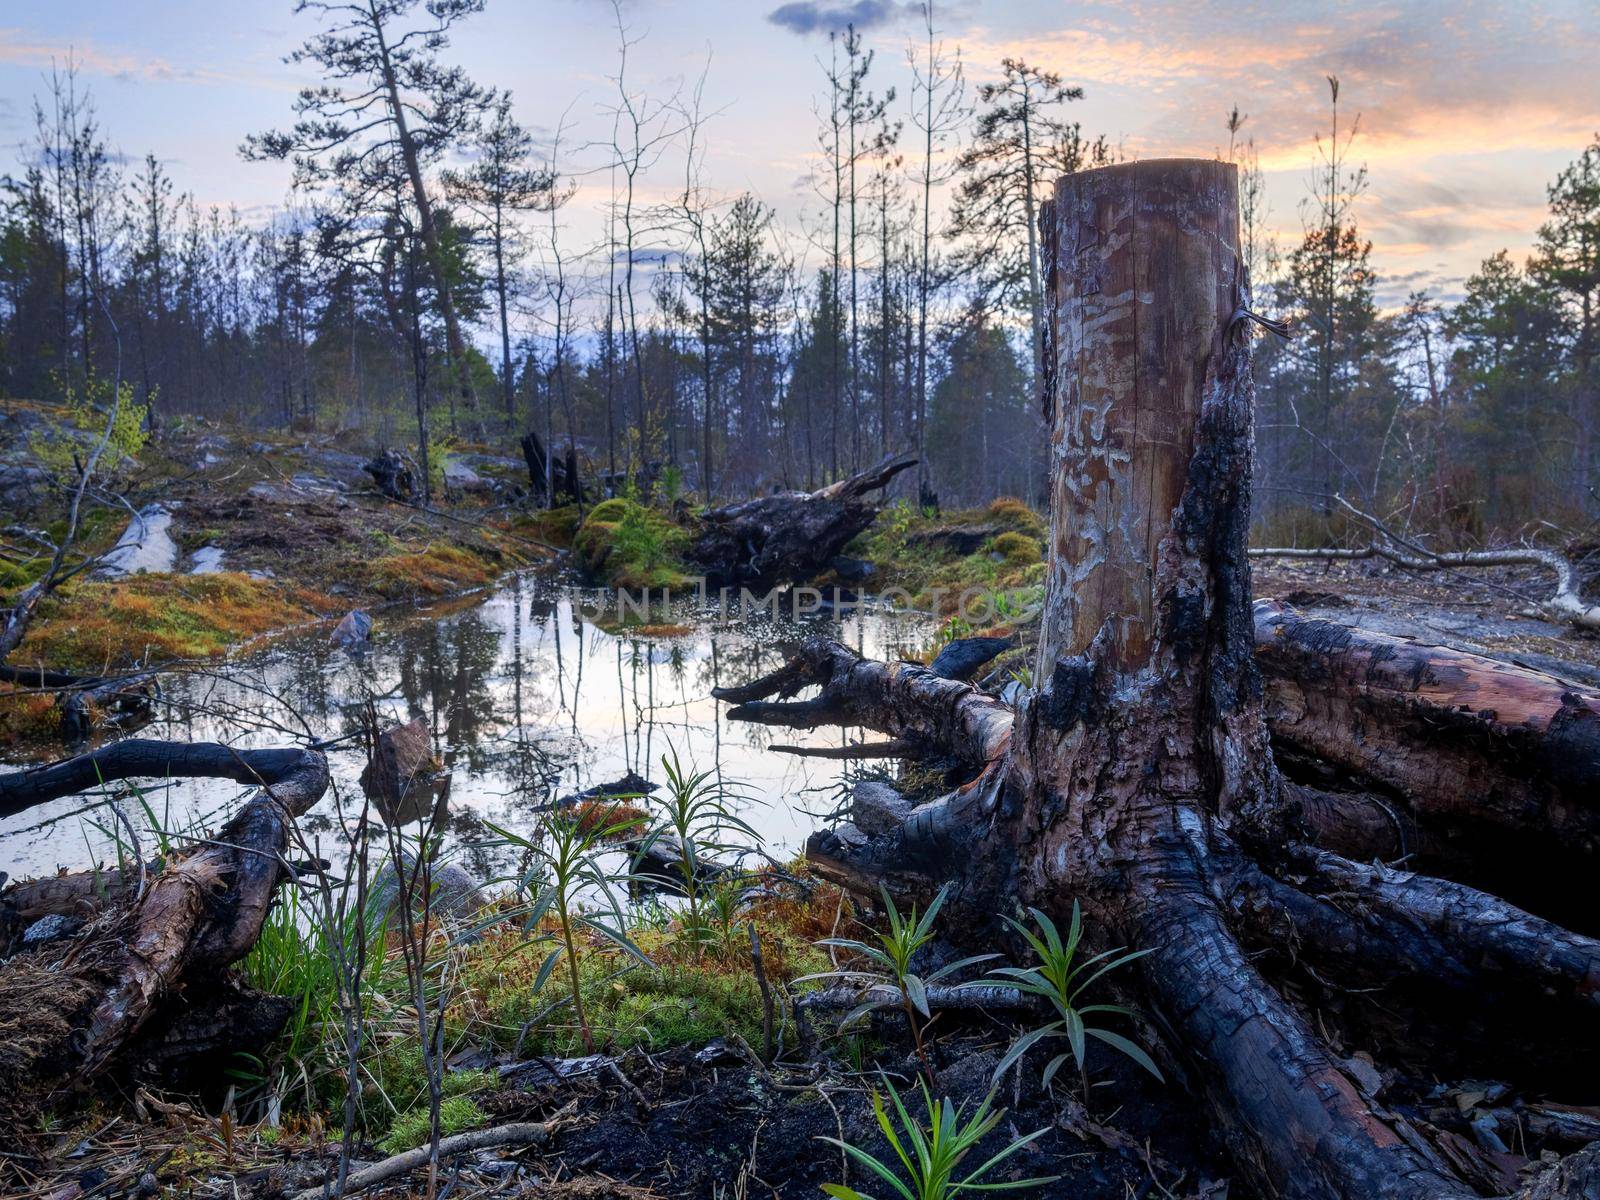 Landscape of the Karelian forest. Two stumps by a small lake in the forest on a rocky massif. by Andre1ns